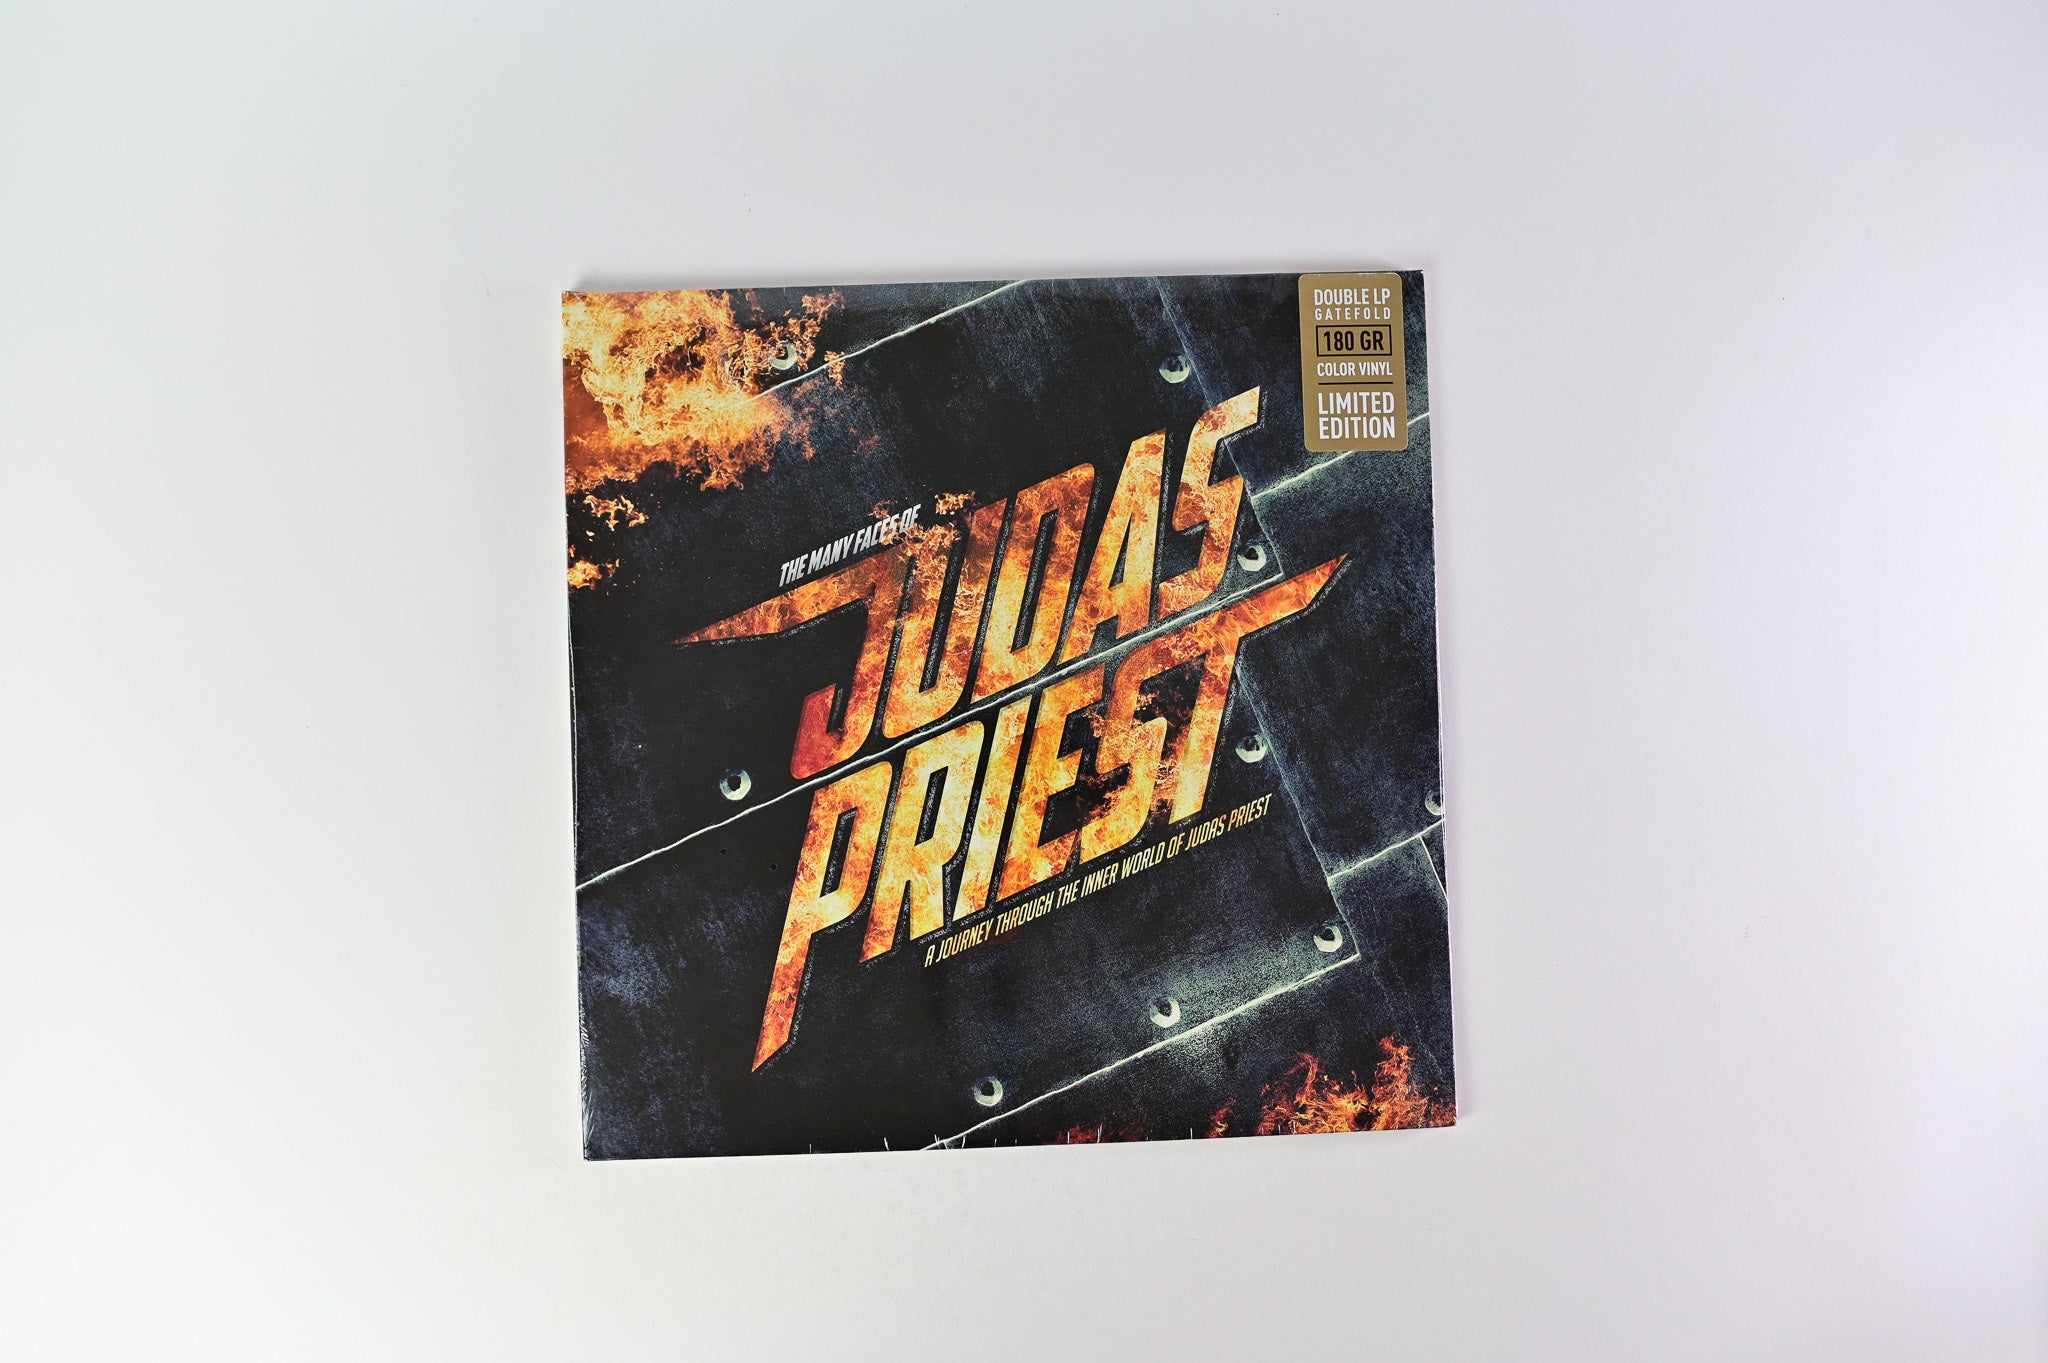 Various - The Many Faces Of Judas Priest (A Journey Through The Inner World Of Judas Priest) on Music Brokers Ltd Yellow/Green Vinyl Sealed